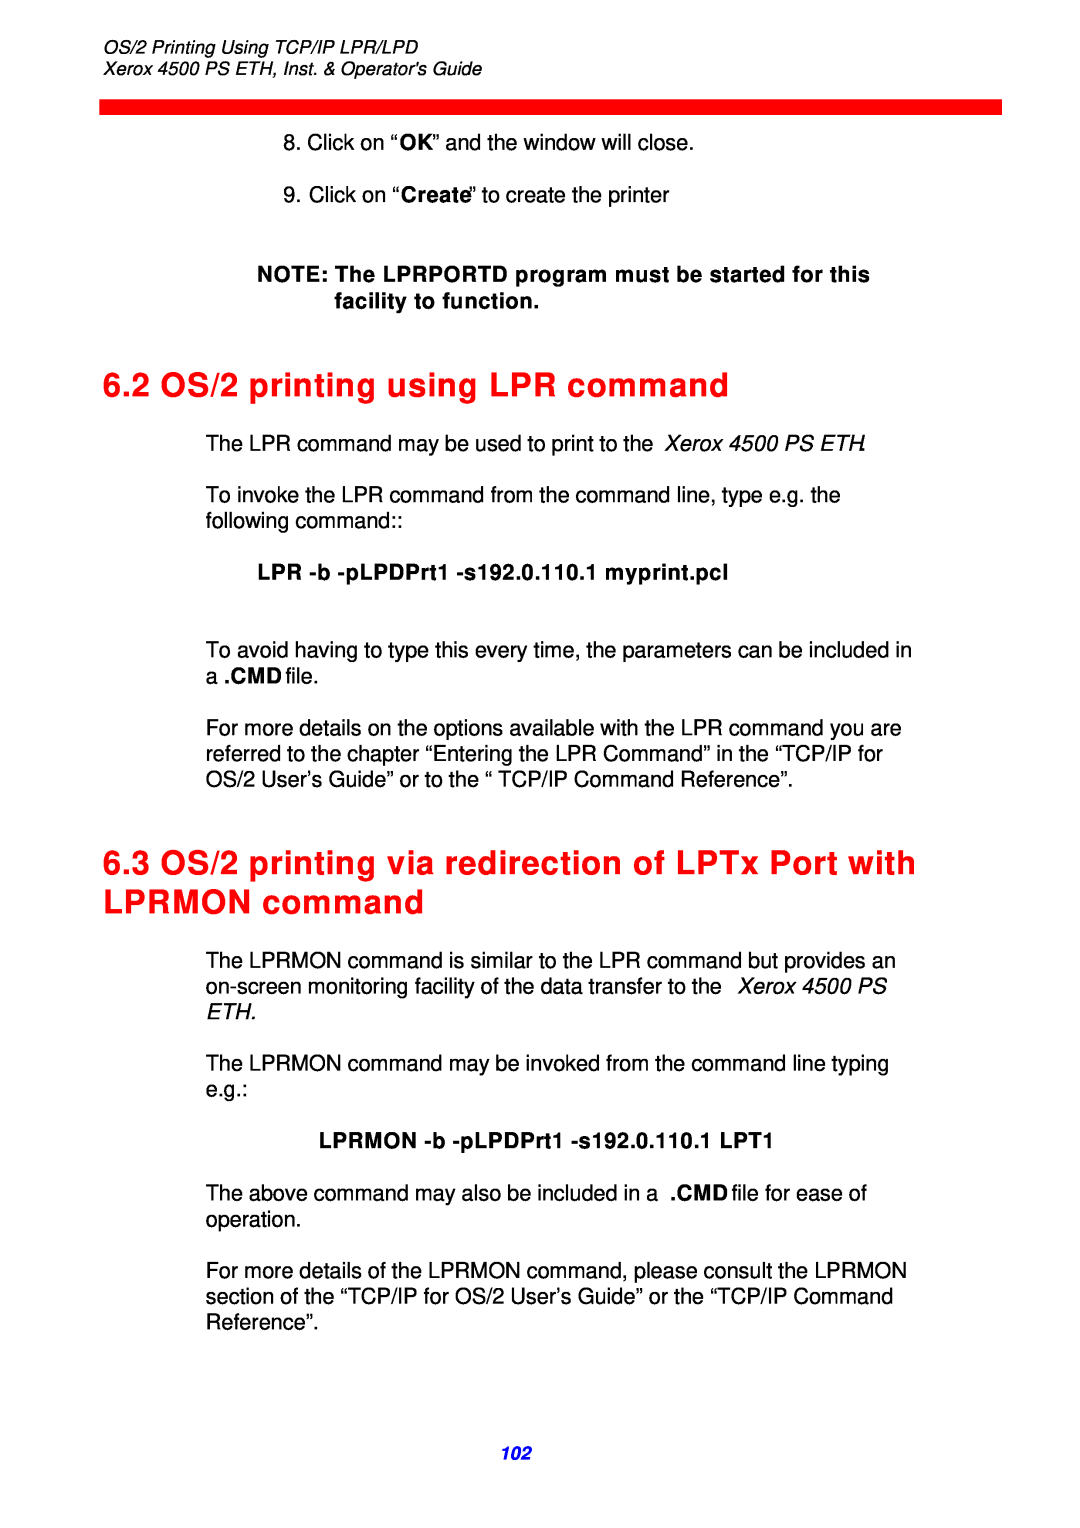 Xerox 4500 ps eth 6.2 OS/2 printing using LPR command, 6.3 OS/2 printing via redirection of LPTx Port with LPRMON command 